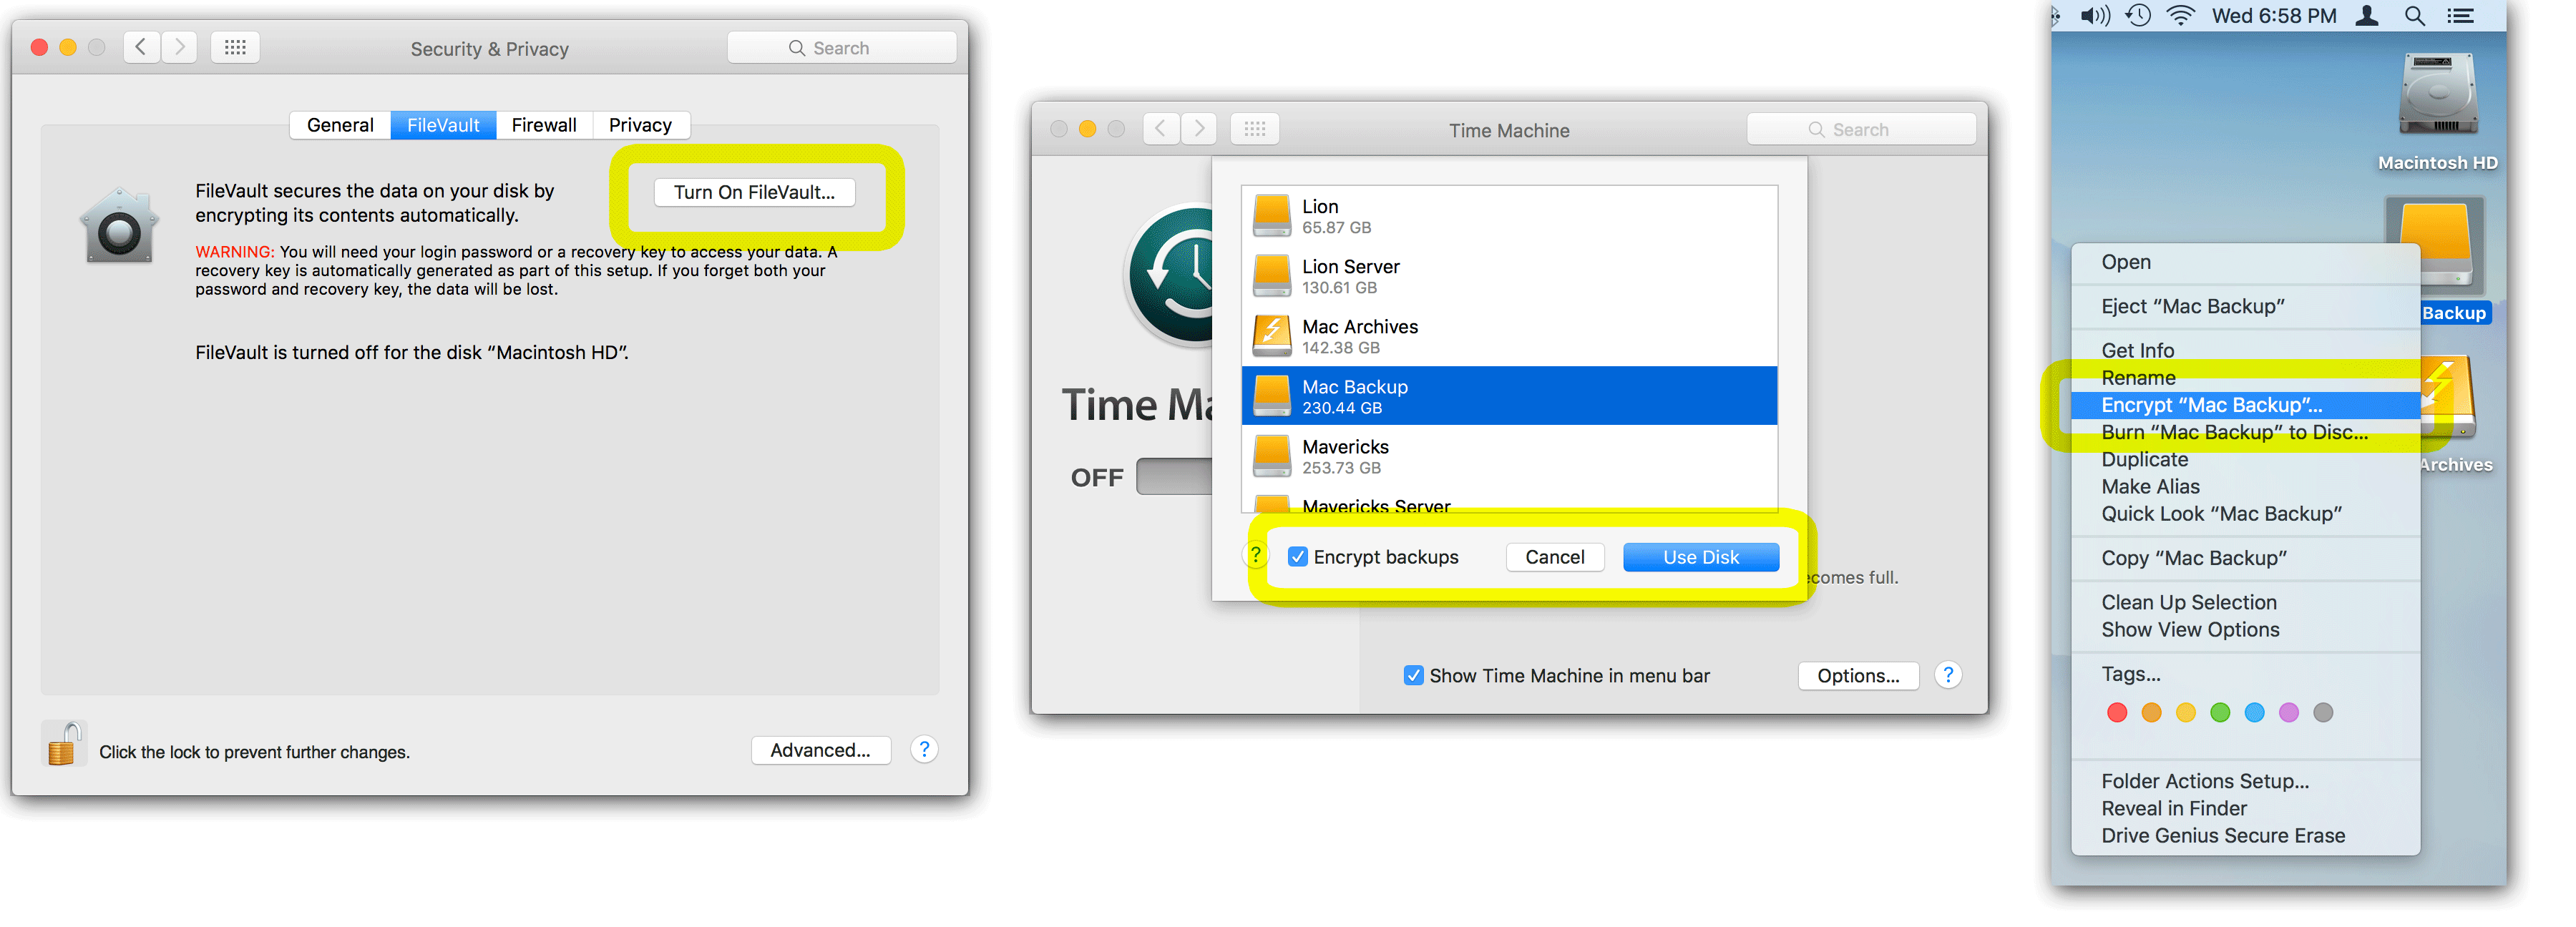 Encrypted Backup Tool For Mac